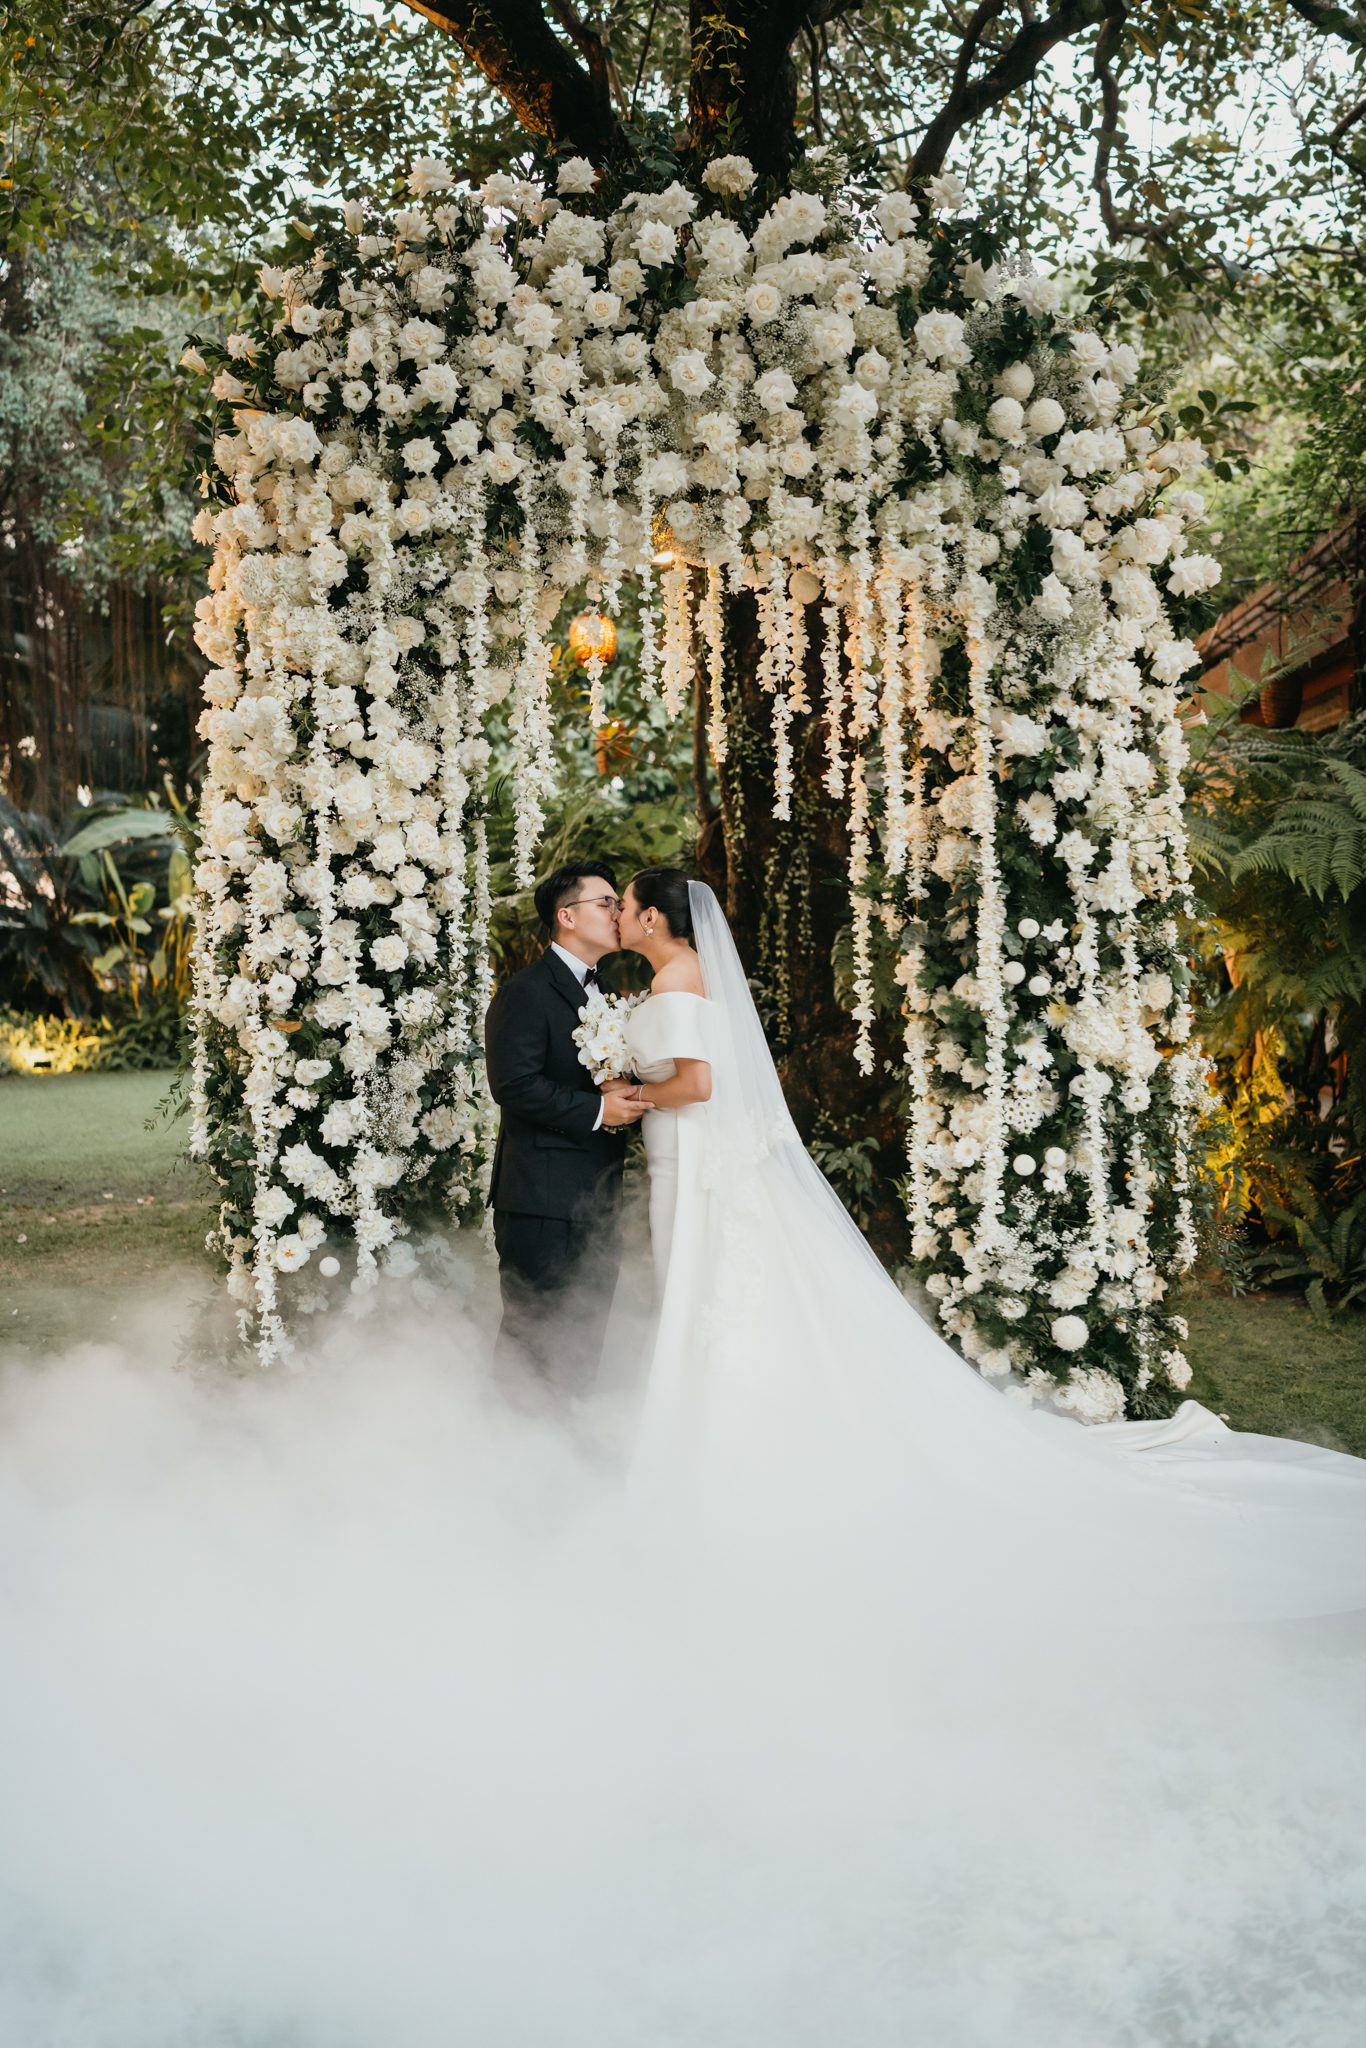 Saigon intimate wedding at An Lam Retreat 4876 - The Planners